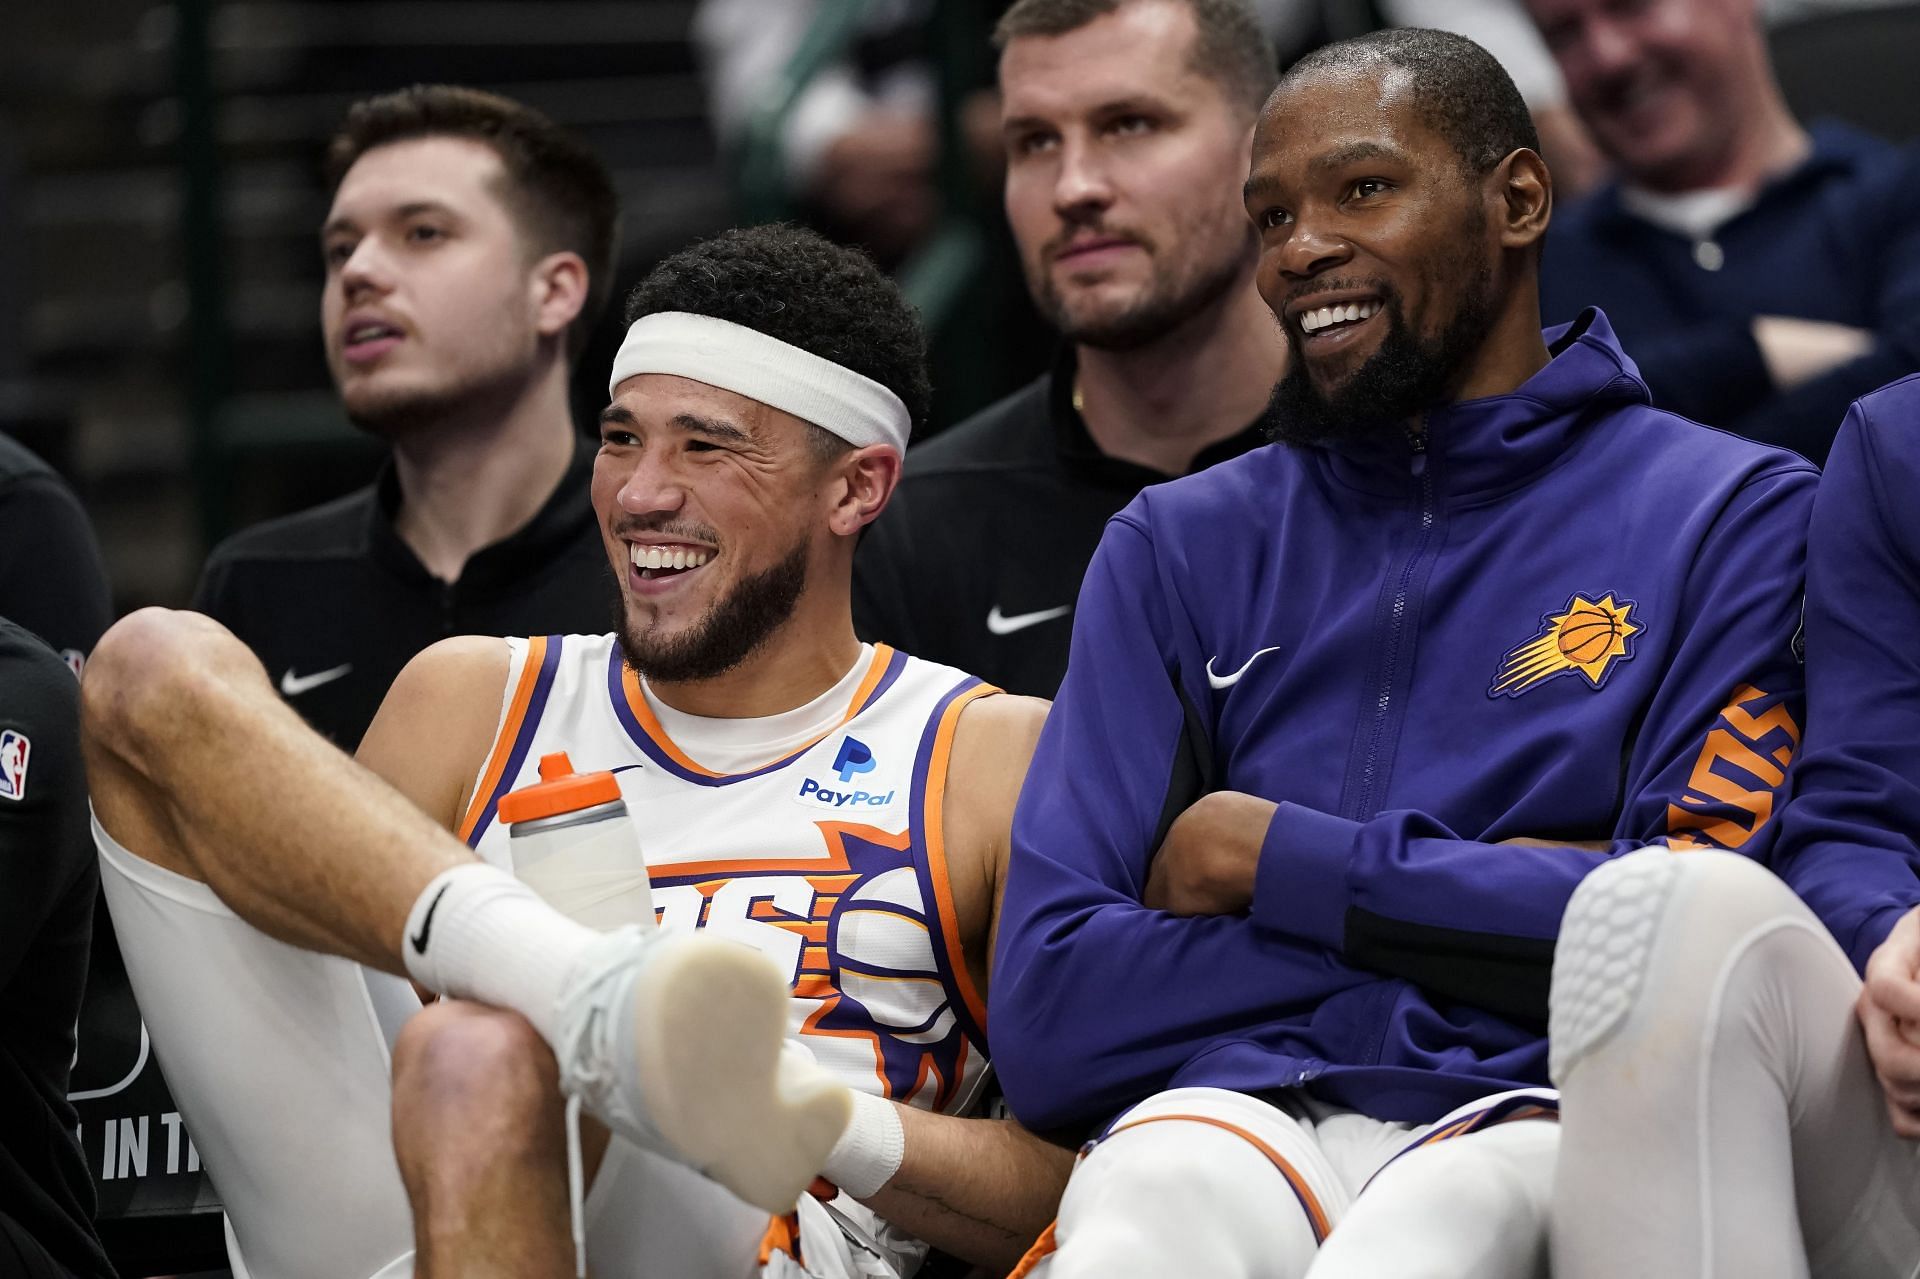 Devin Booker suffered an injury late in the game on Saturday.